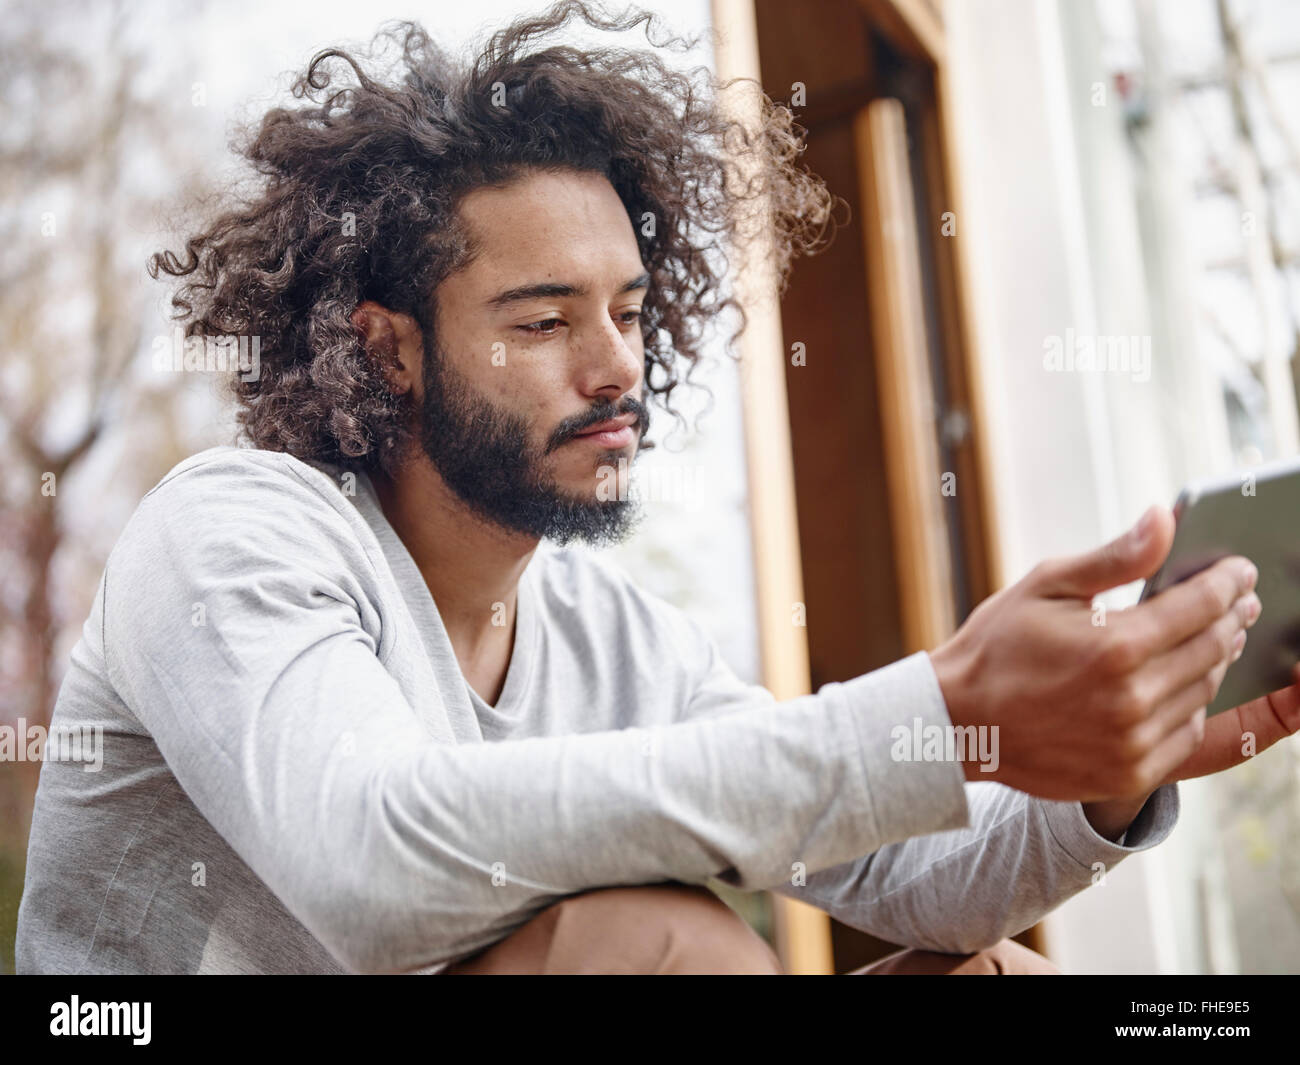 Young man looking at digital tablet outdoors Stock Photo